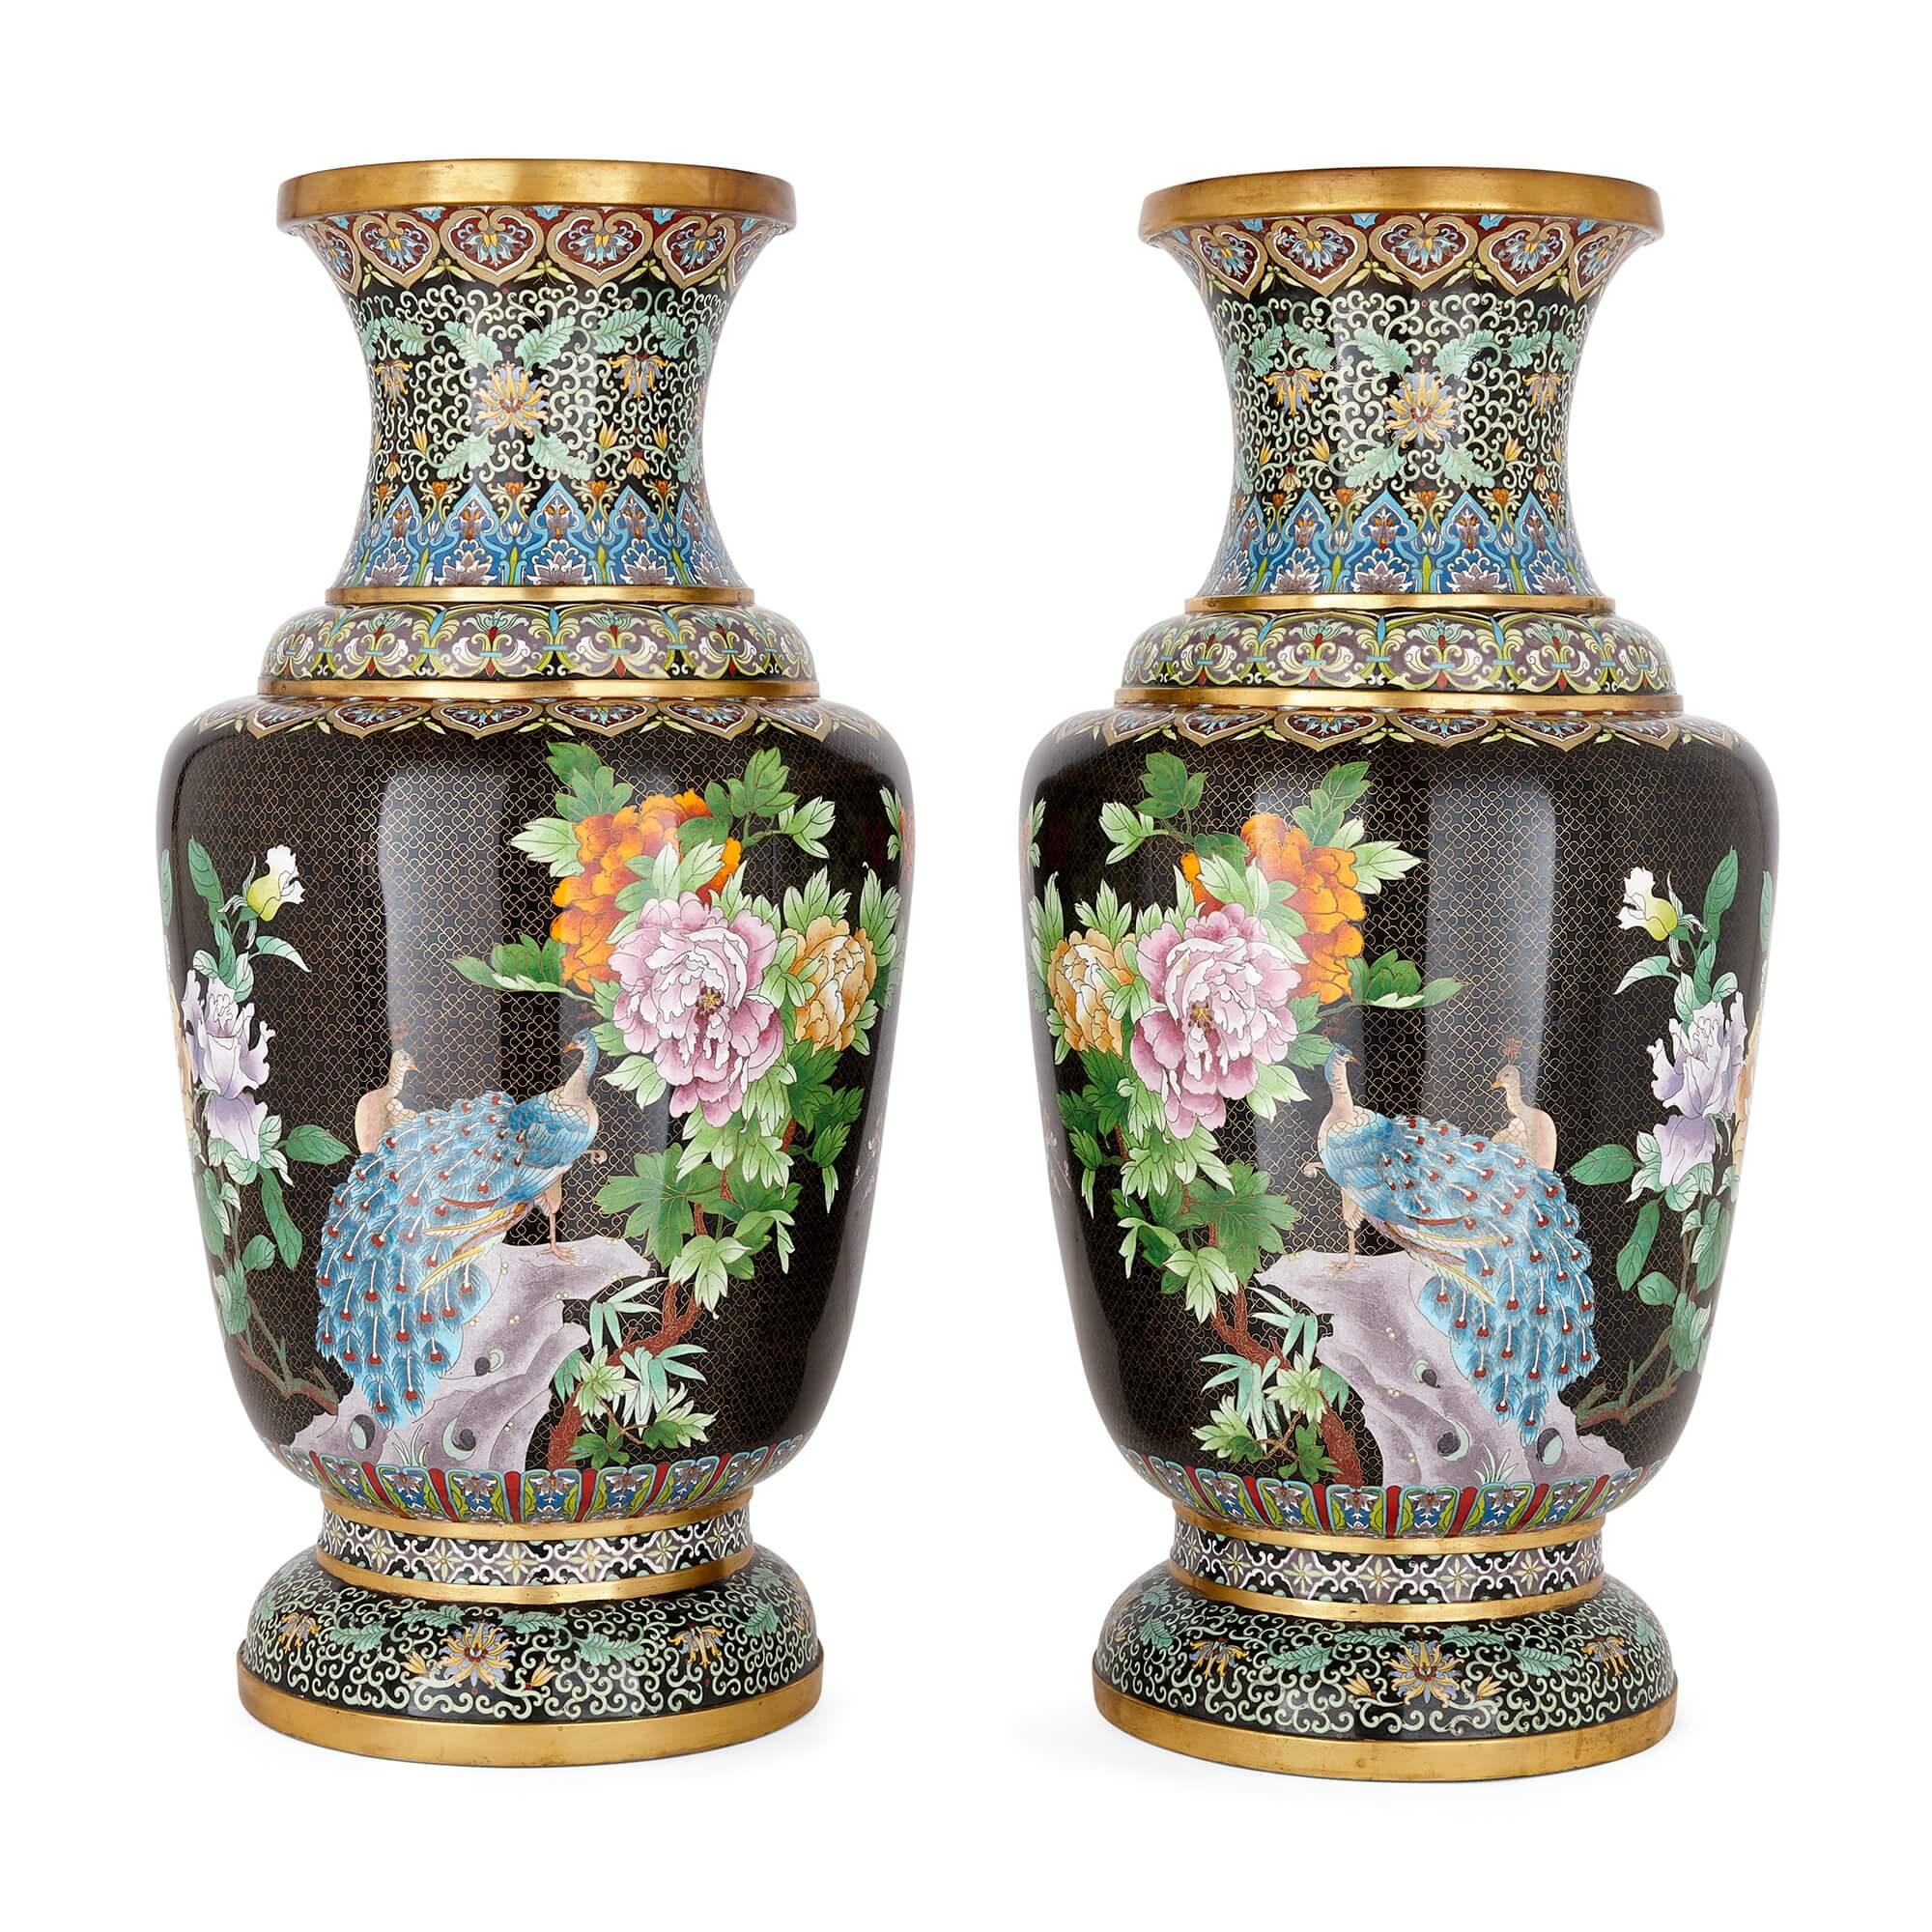 A pair of large Chinese gilt and black ground cloisonné enamel vases
Chinese, 20th Century 
Height 67cm, diameter 38cm

These beautiful vases are exceptional examples of Chinese cloisonné enamel decorative art. This popular and highly effective